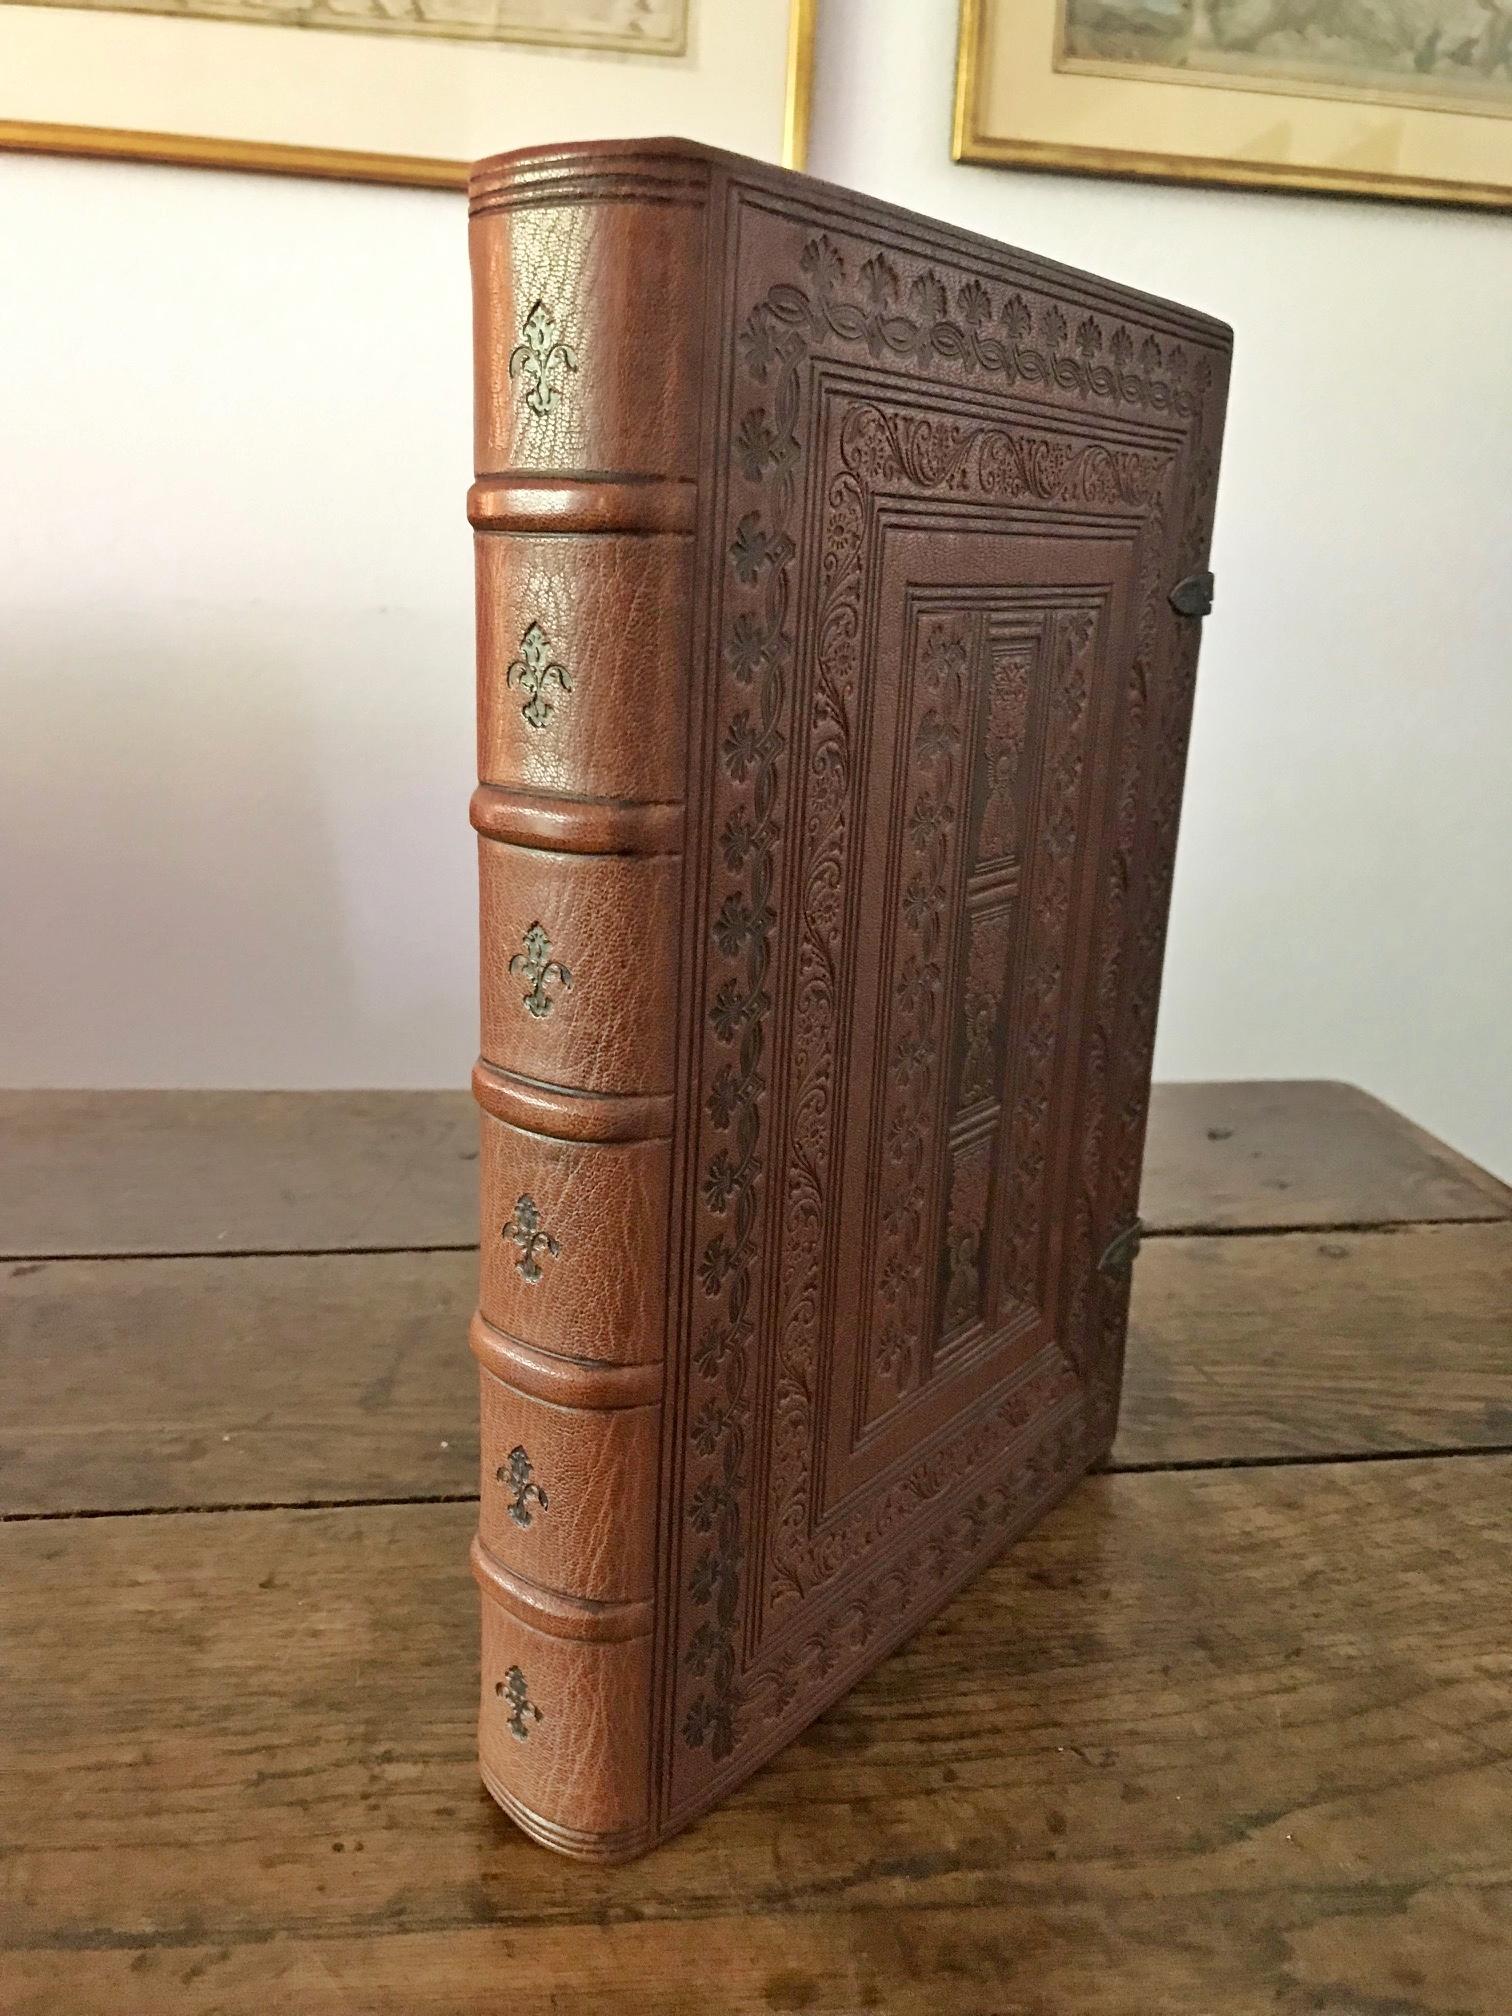 Very rare first edition post incunabulum of Augustine of Hippo (of Thagaste or also Aurelius Augustine), 1509

Sehr seltenen Erstedition Postinkunabel von Augustinus von Hippo (von Thagaste oder auch Aurelius Augustinus), 1509

Aurelius